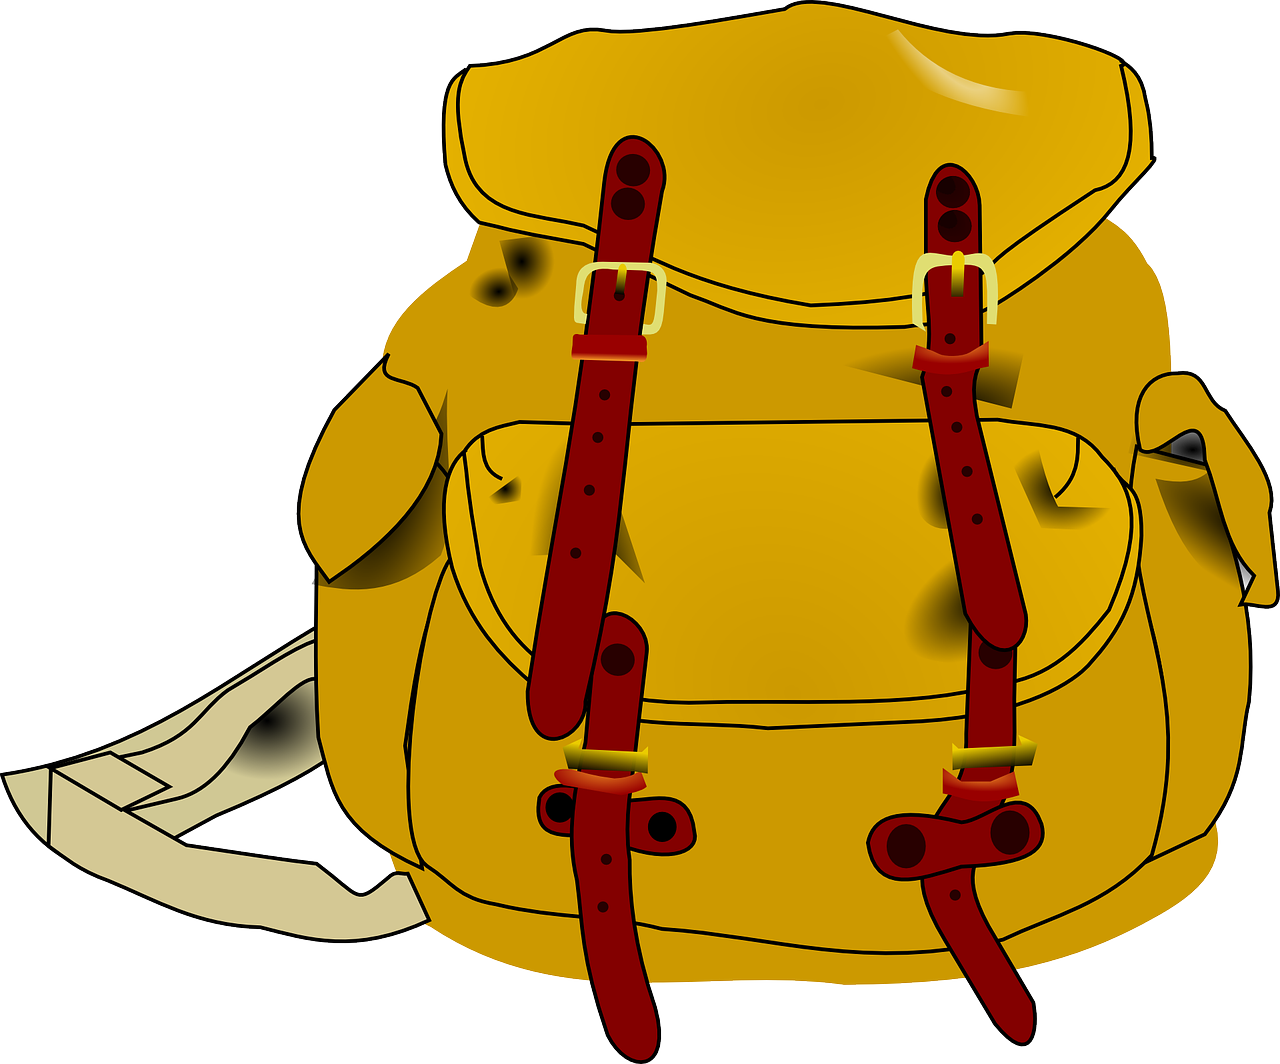 backpack-154121_1280.png